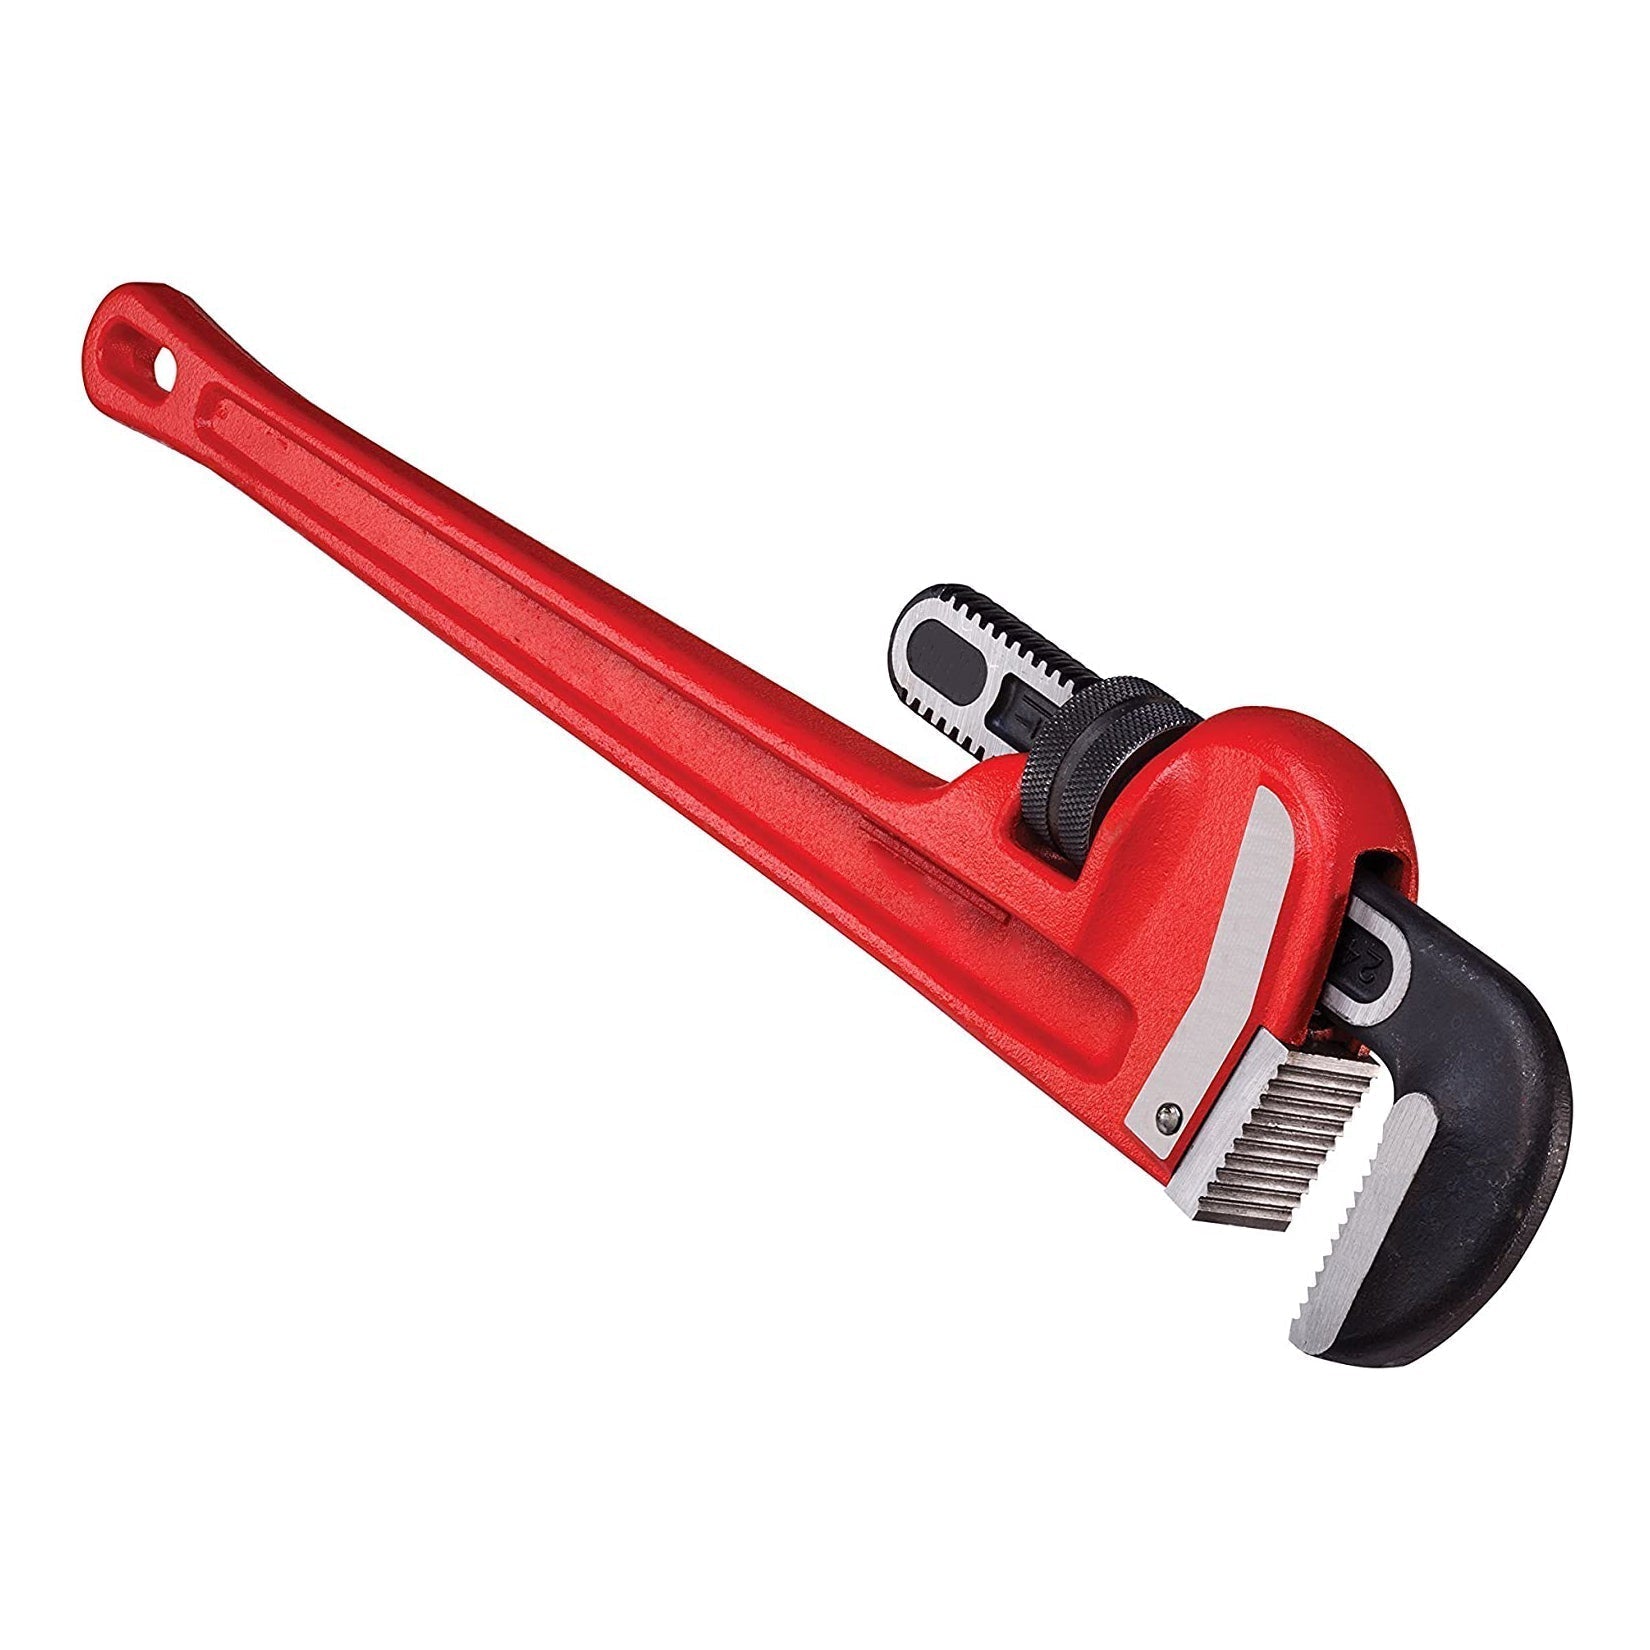 findmall Heavy Duty Straight Pipe Wrench, 24 Inch Plumbing Wrench, Pipe Capacity 3 Inch, for Pipe Diameters of 1-1/2 Inch to 2-1/2 Inch FINDMALLPARTS